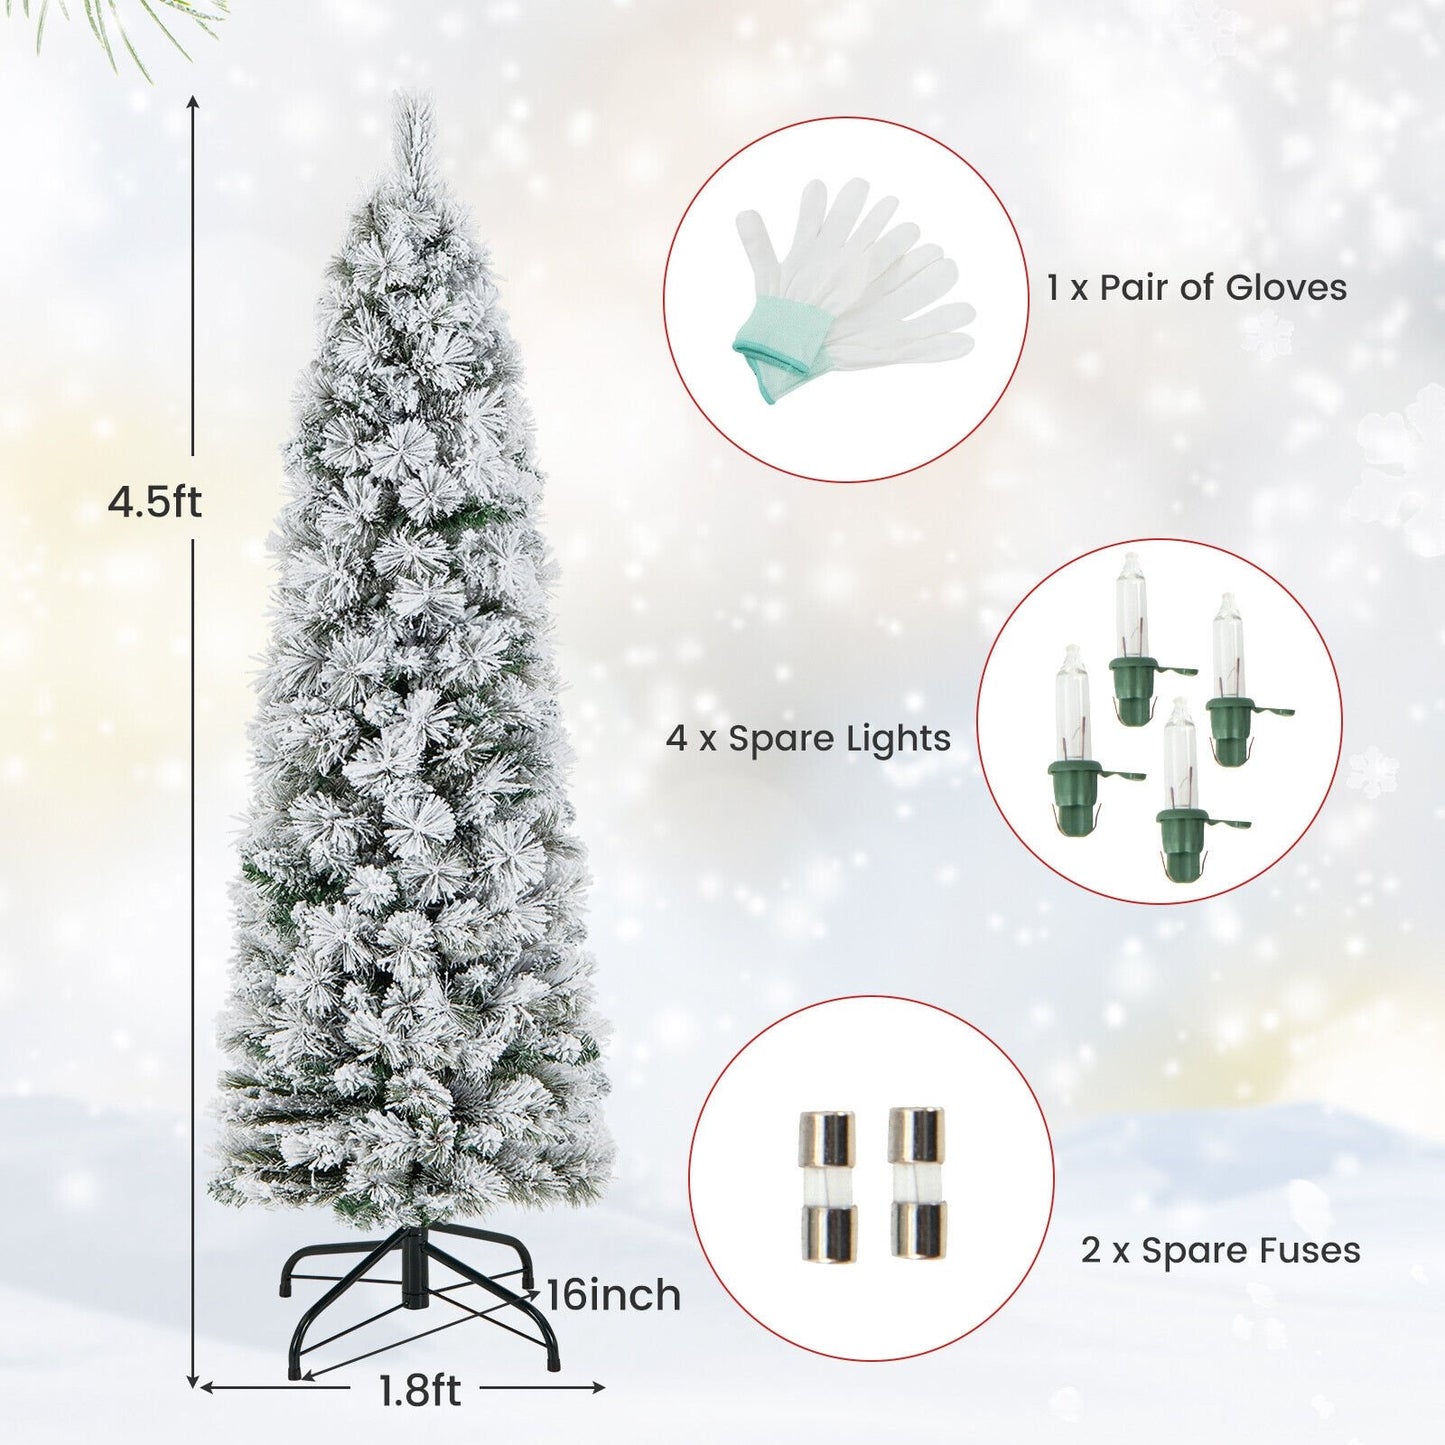 4.5/6/7 Feet Christmas Tree with 258 Branch Tips and 100 Incandescent Lights-Flocked and Slim-4.5 ft